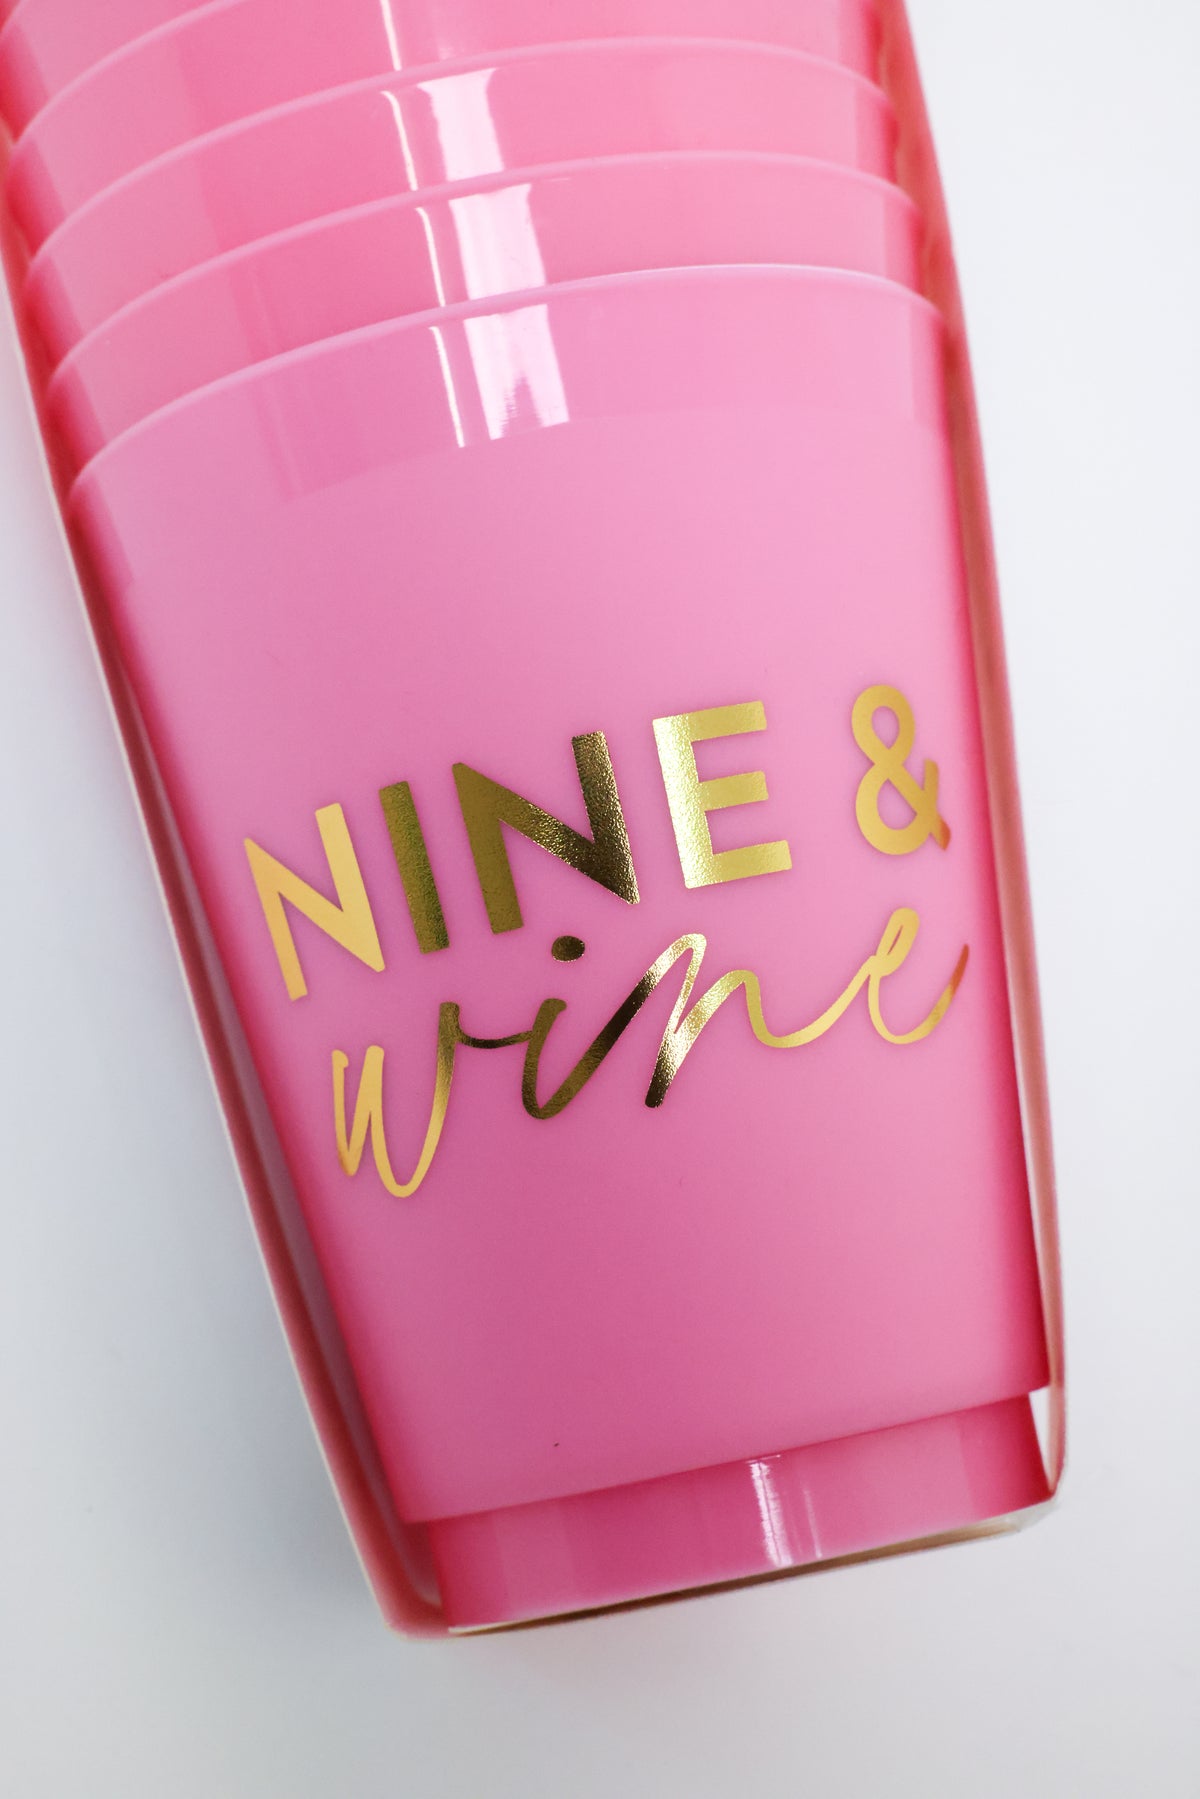 Nine & Wine Wine Cocktail Party Cups